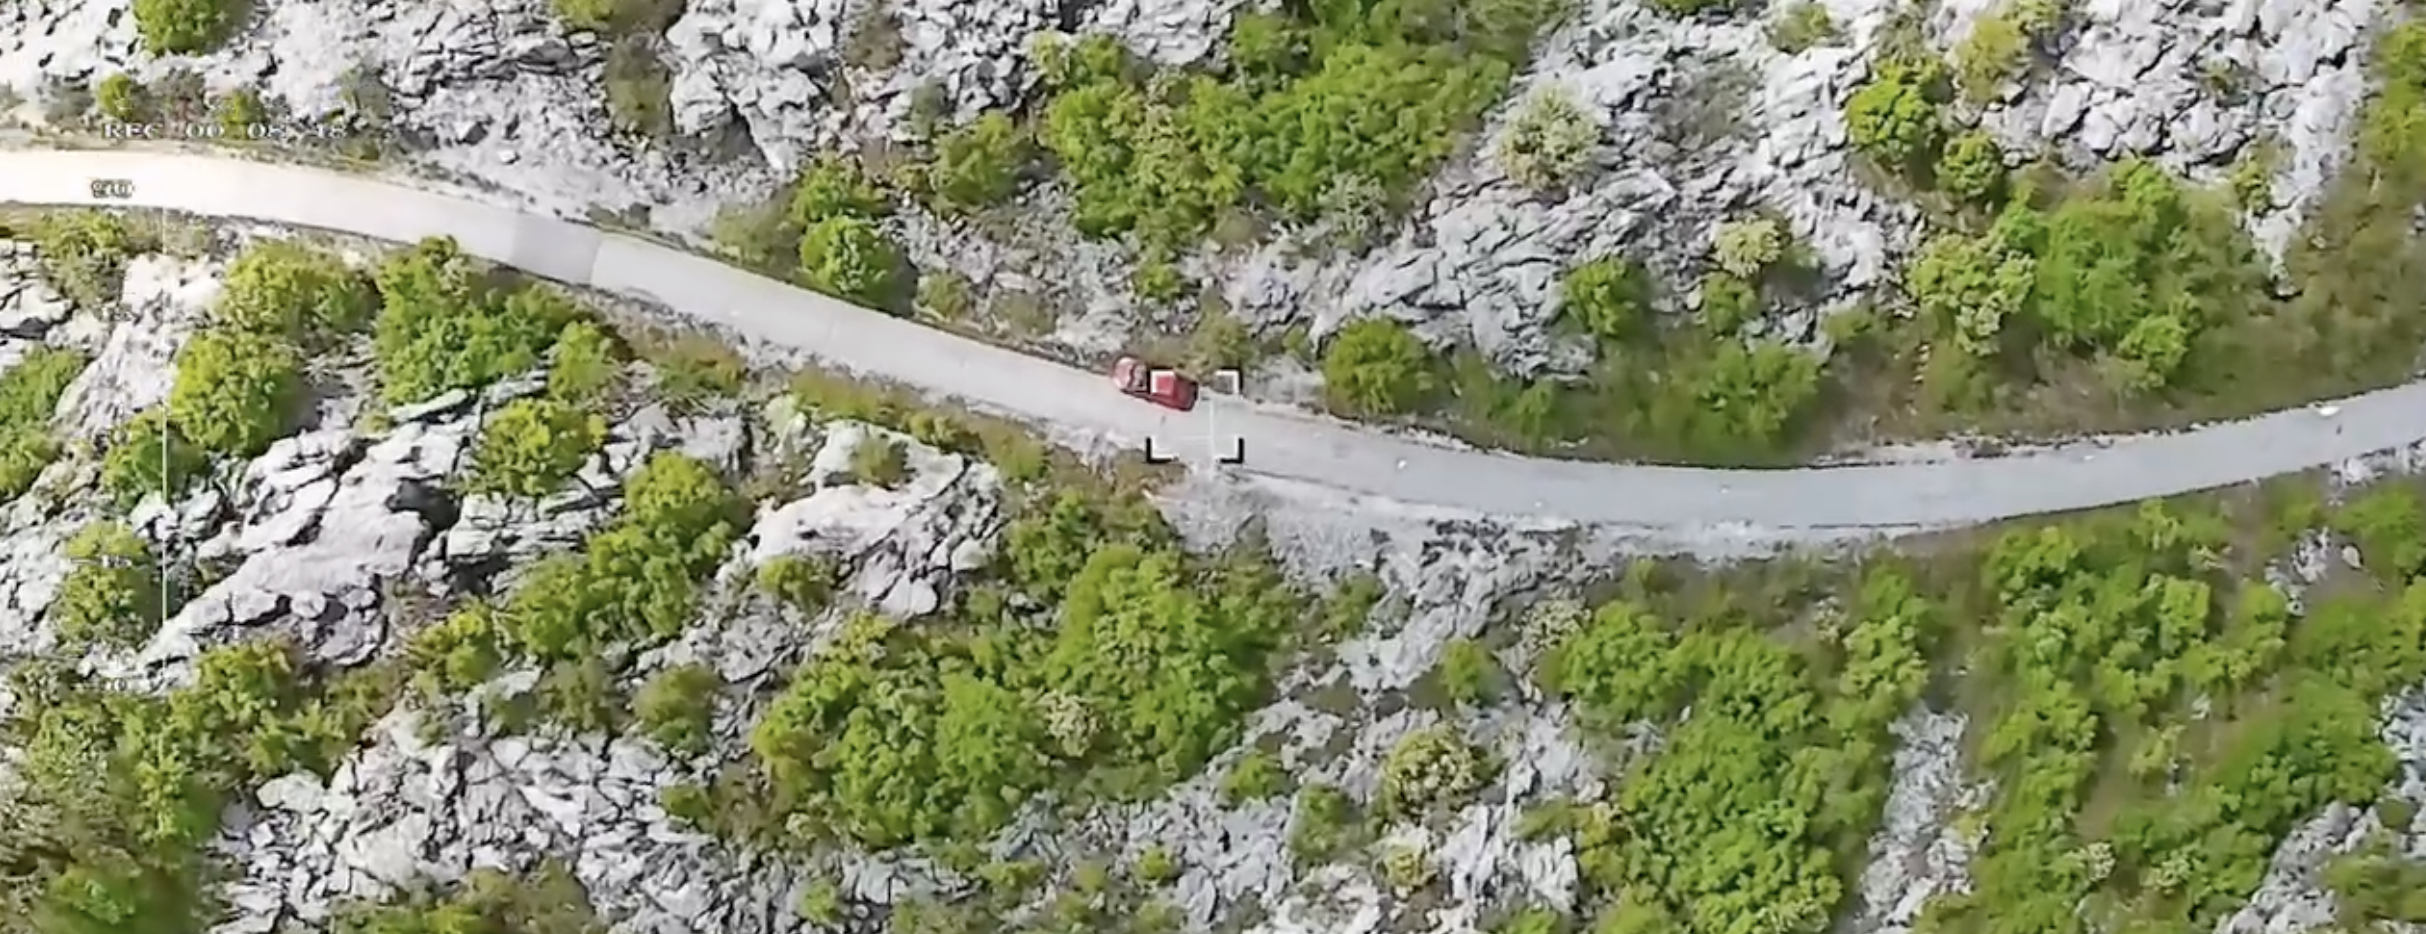 OBJECT DETECTION & TRACKING IN THE MOUNTAIN AREA (MONTENEGRO)